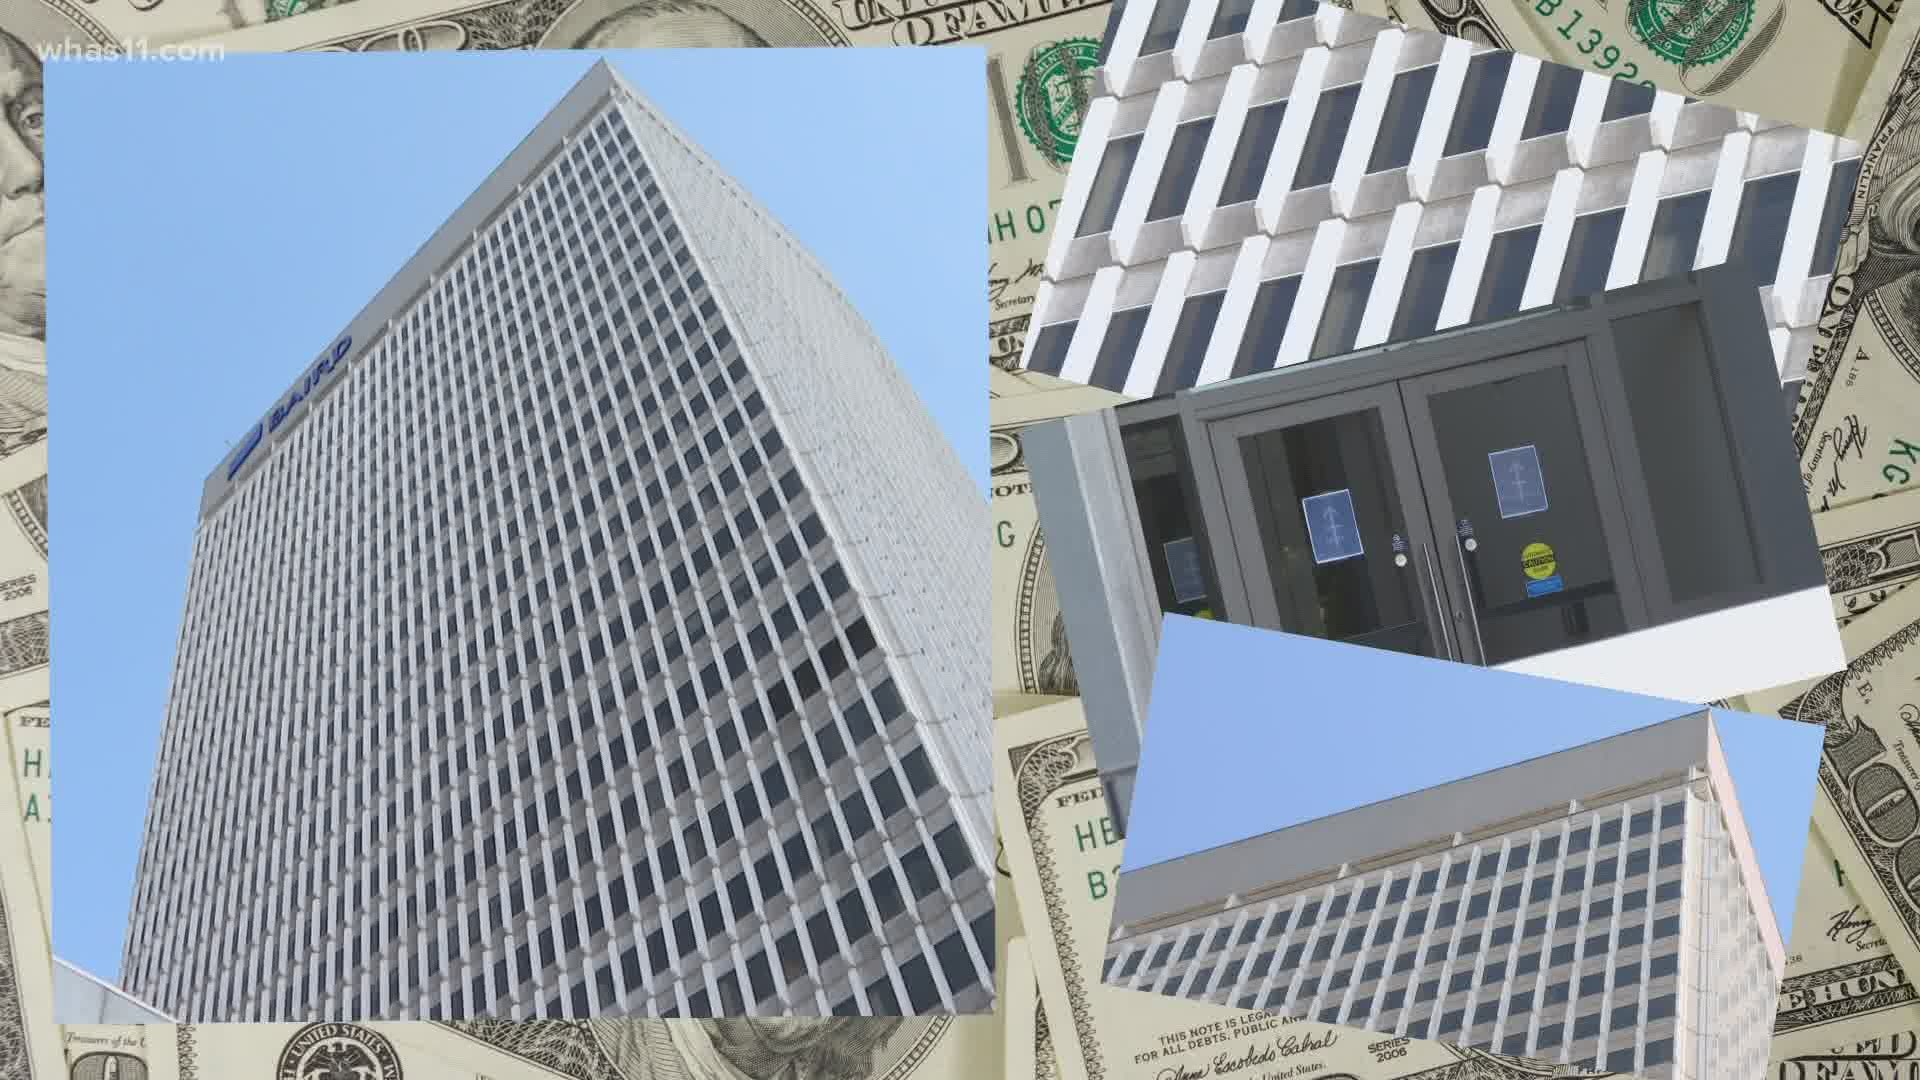 The feds are looking to seize ownership of the 30-story downtown Louisville tower, formerly known as PNC Plaza office tower.